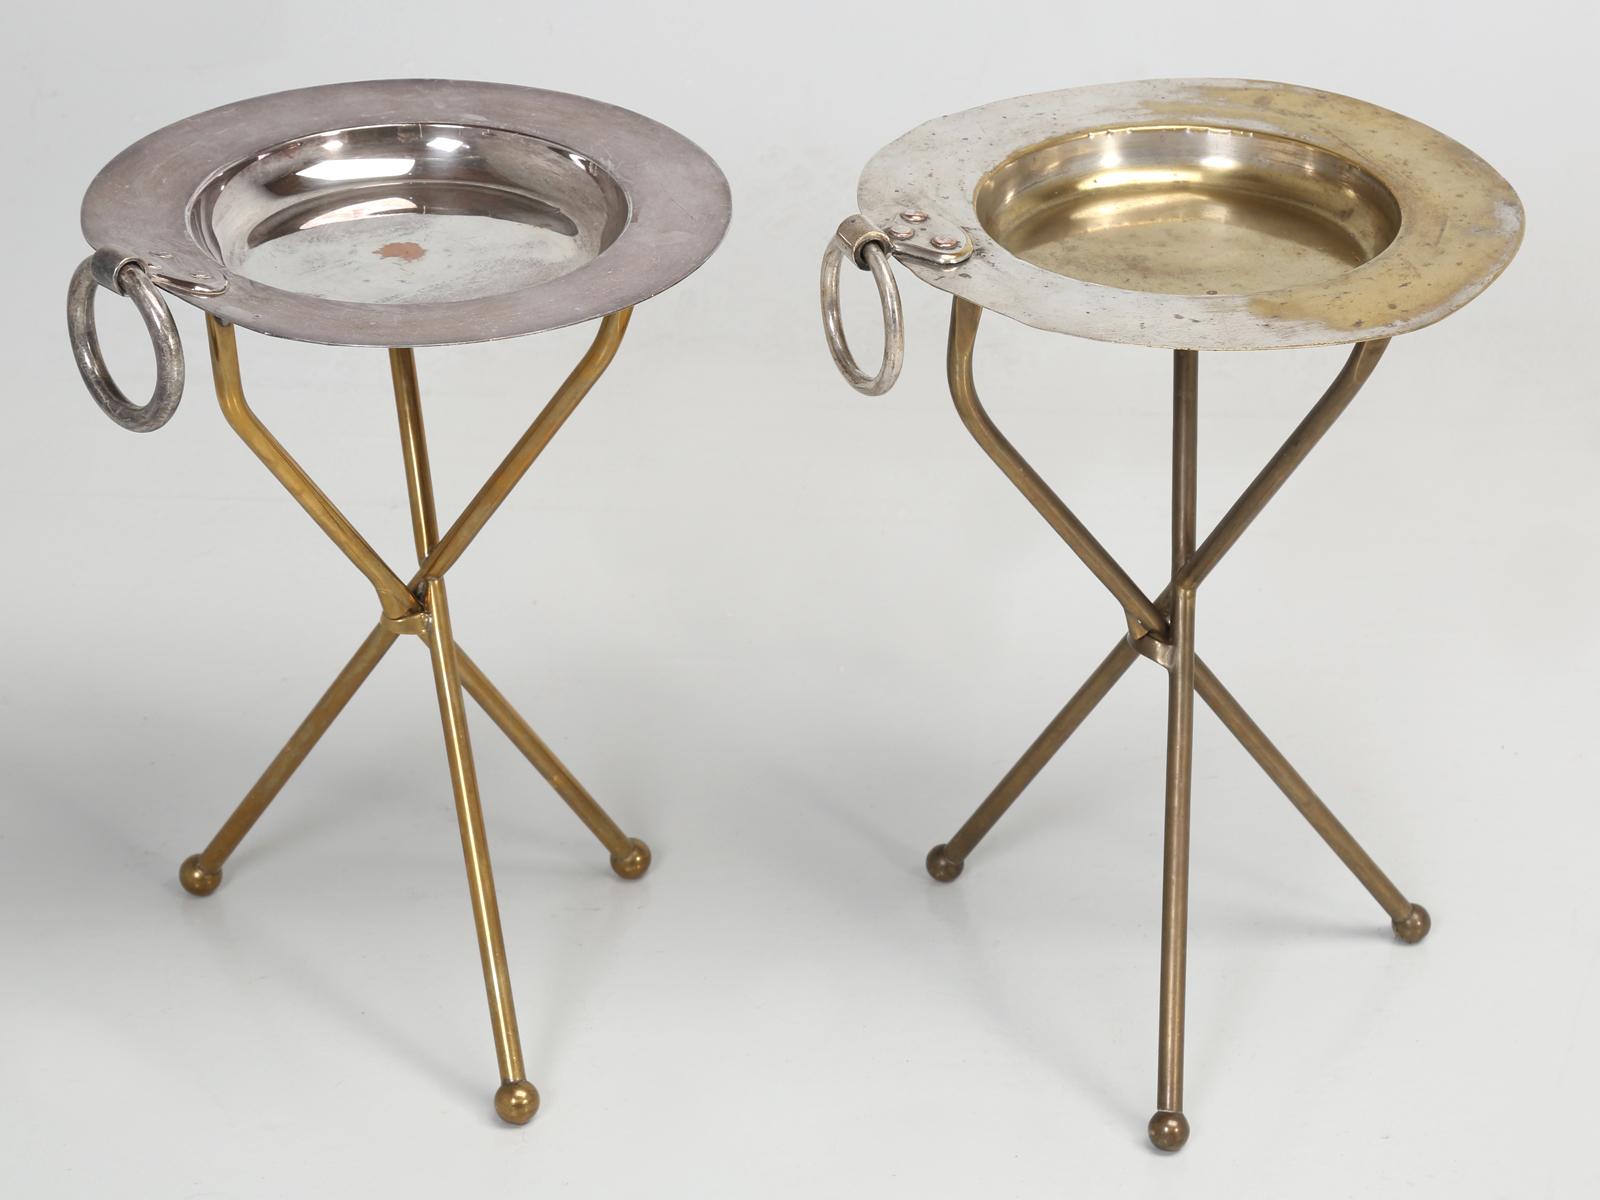 Very unusual pair of attractive French petite Mid-Century Modern side tables, or end table or wine tables and by their appearances, I would guess the latter. Typically, when you see small French metal tables and, in this case, they are made of solid